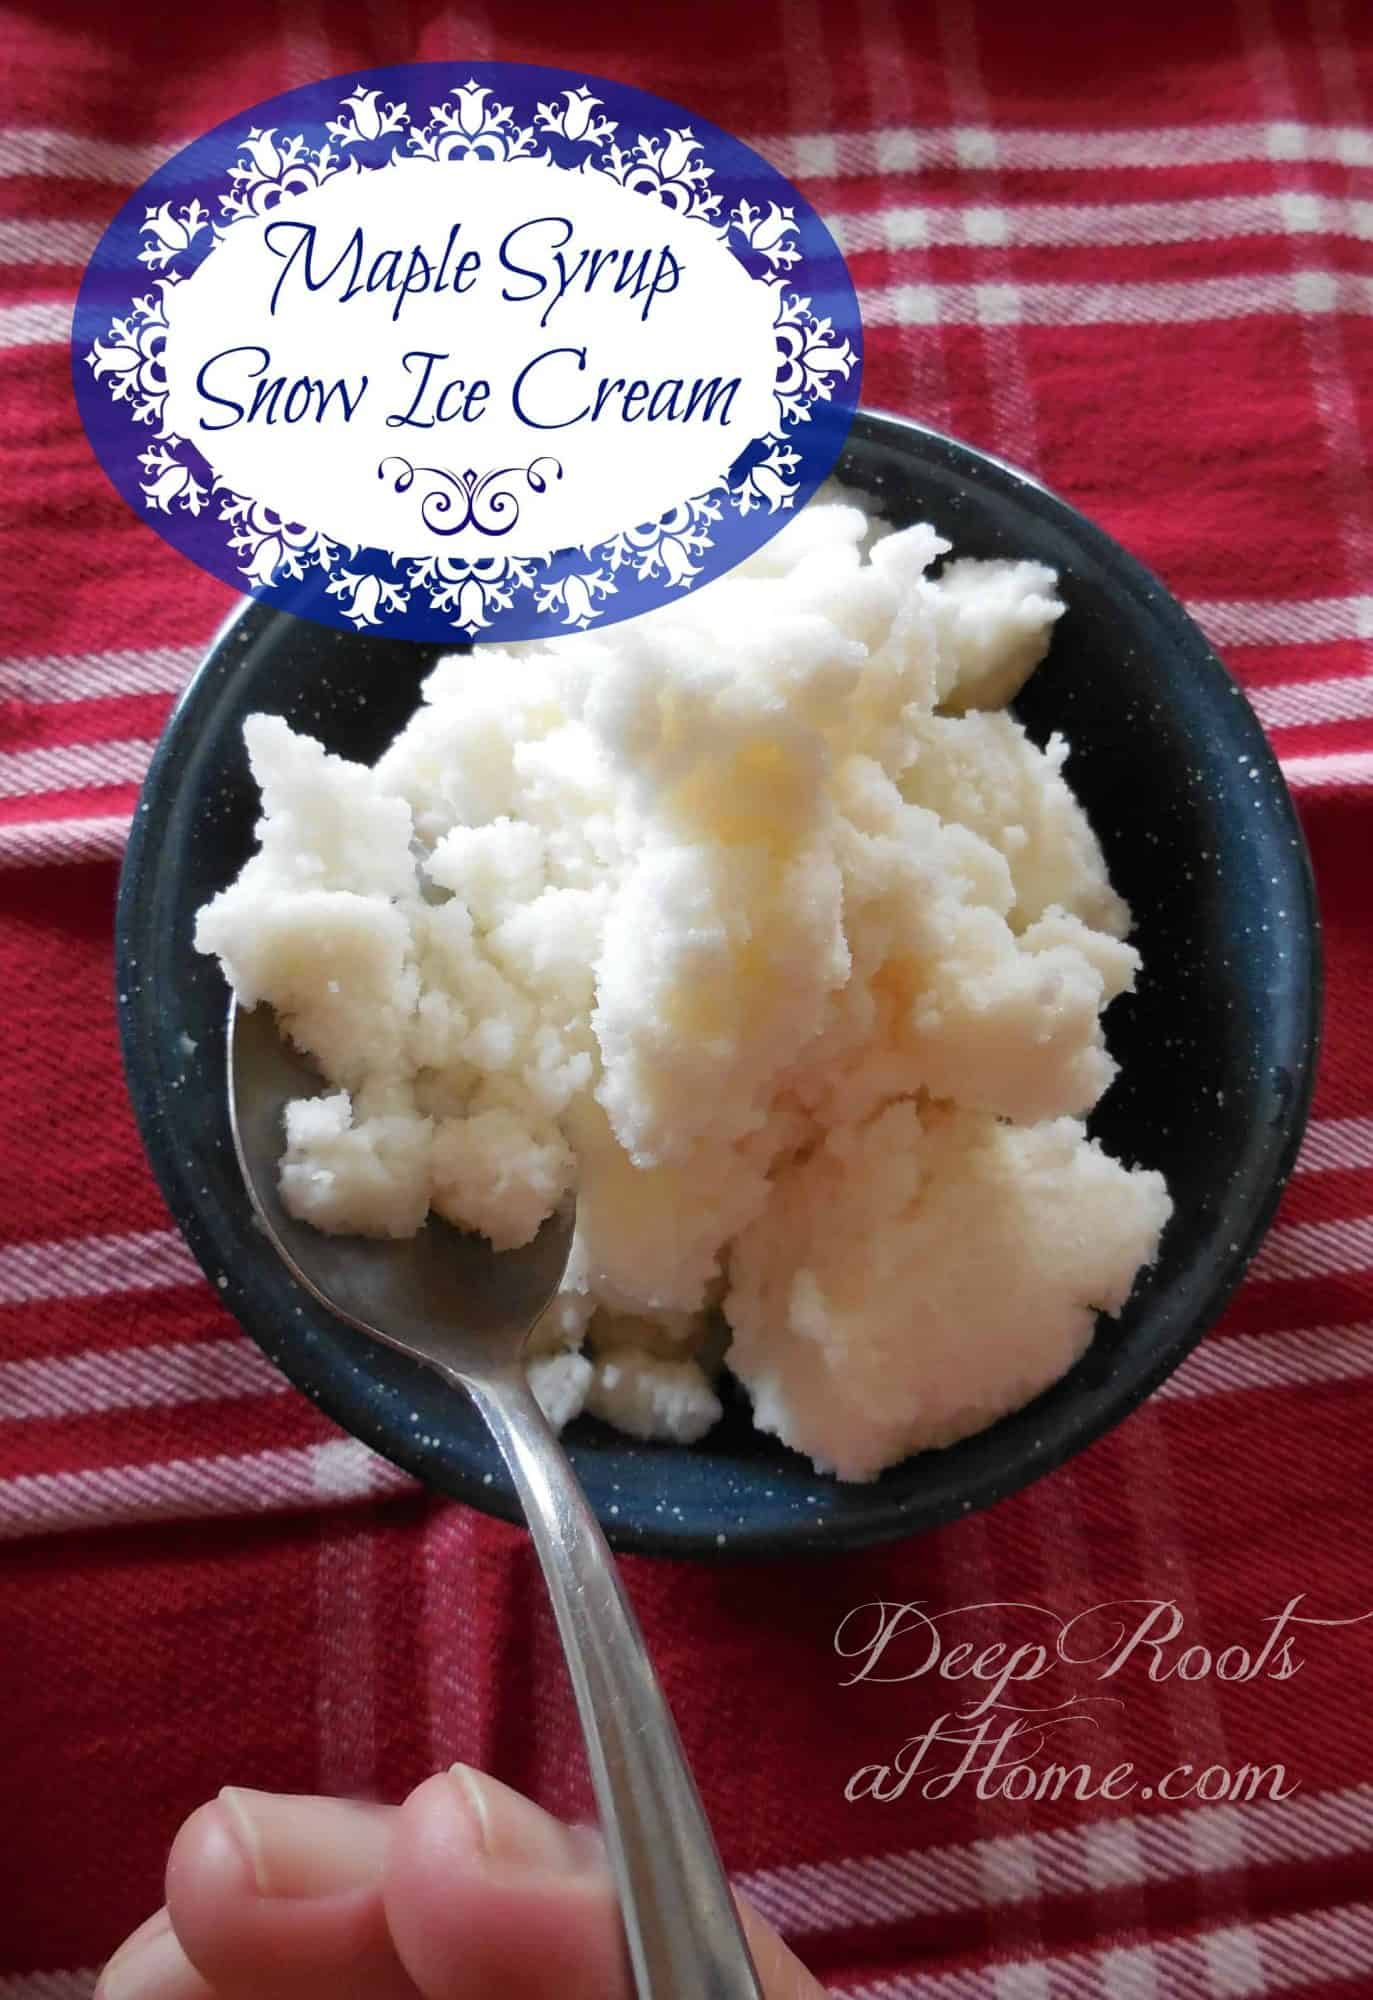 Maple Syrup Snow Ice Cream Like Laura Ingalls Ate In 'Little House'. Maple syrup snow ice cream in a blue porcelain bowl.